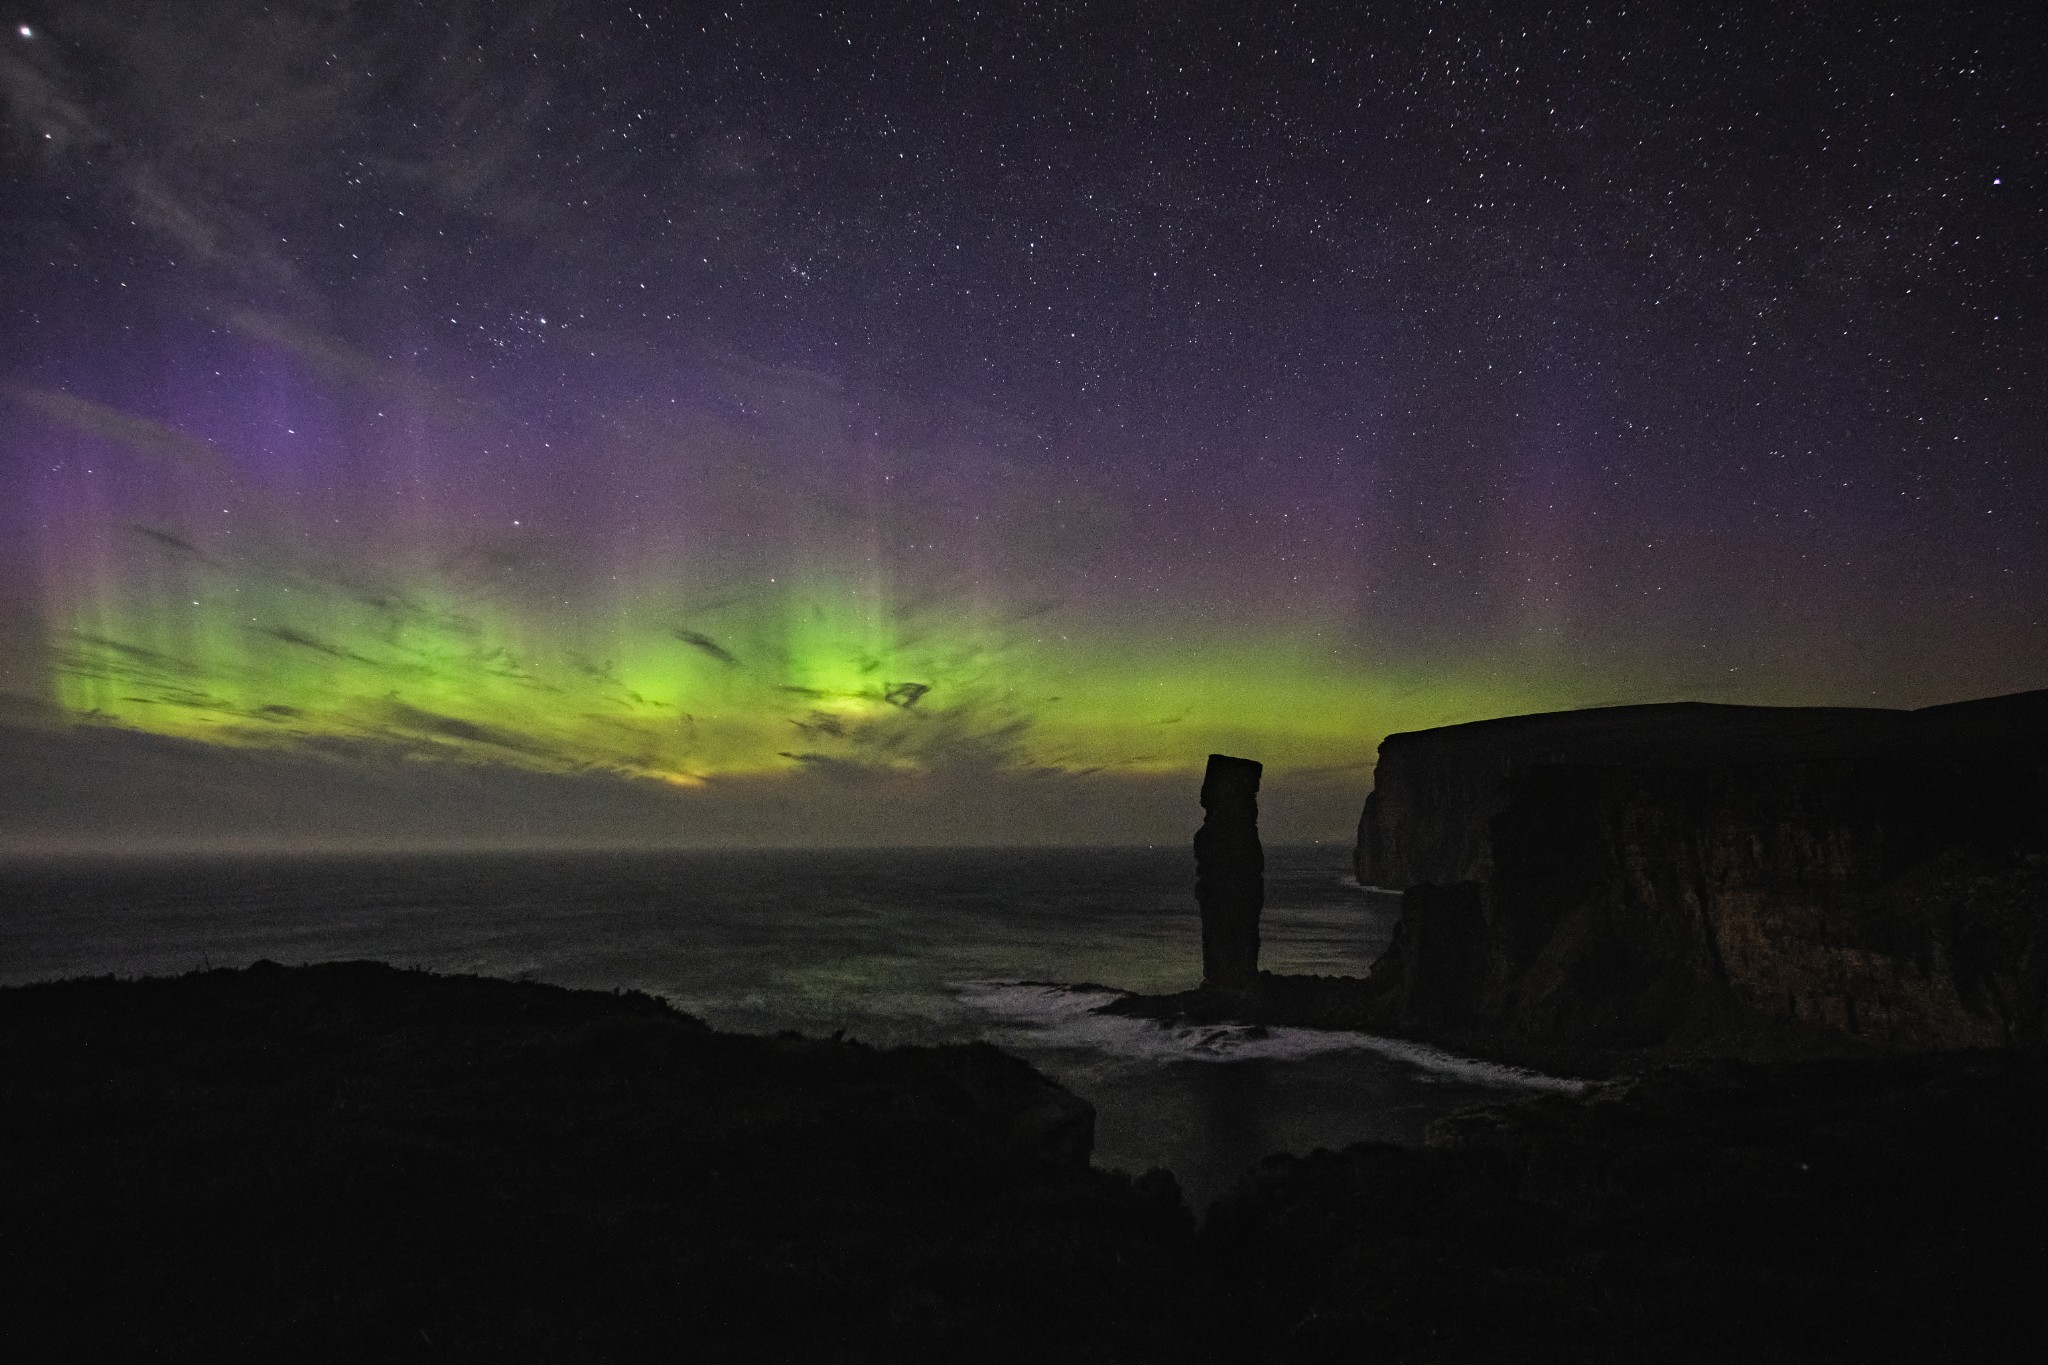 Aurora over the Old Man of Hoy, Orkney - image by John Stoddard